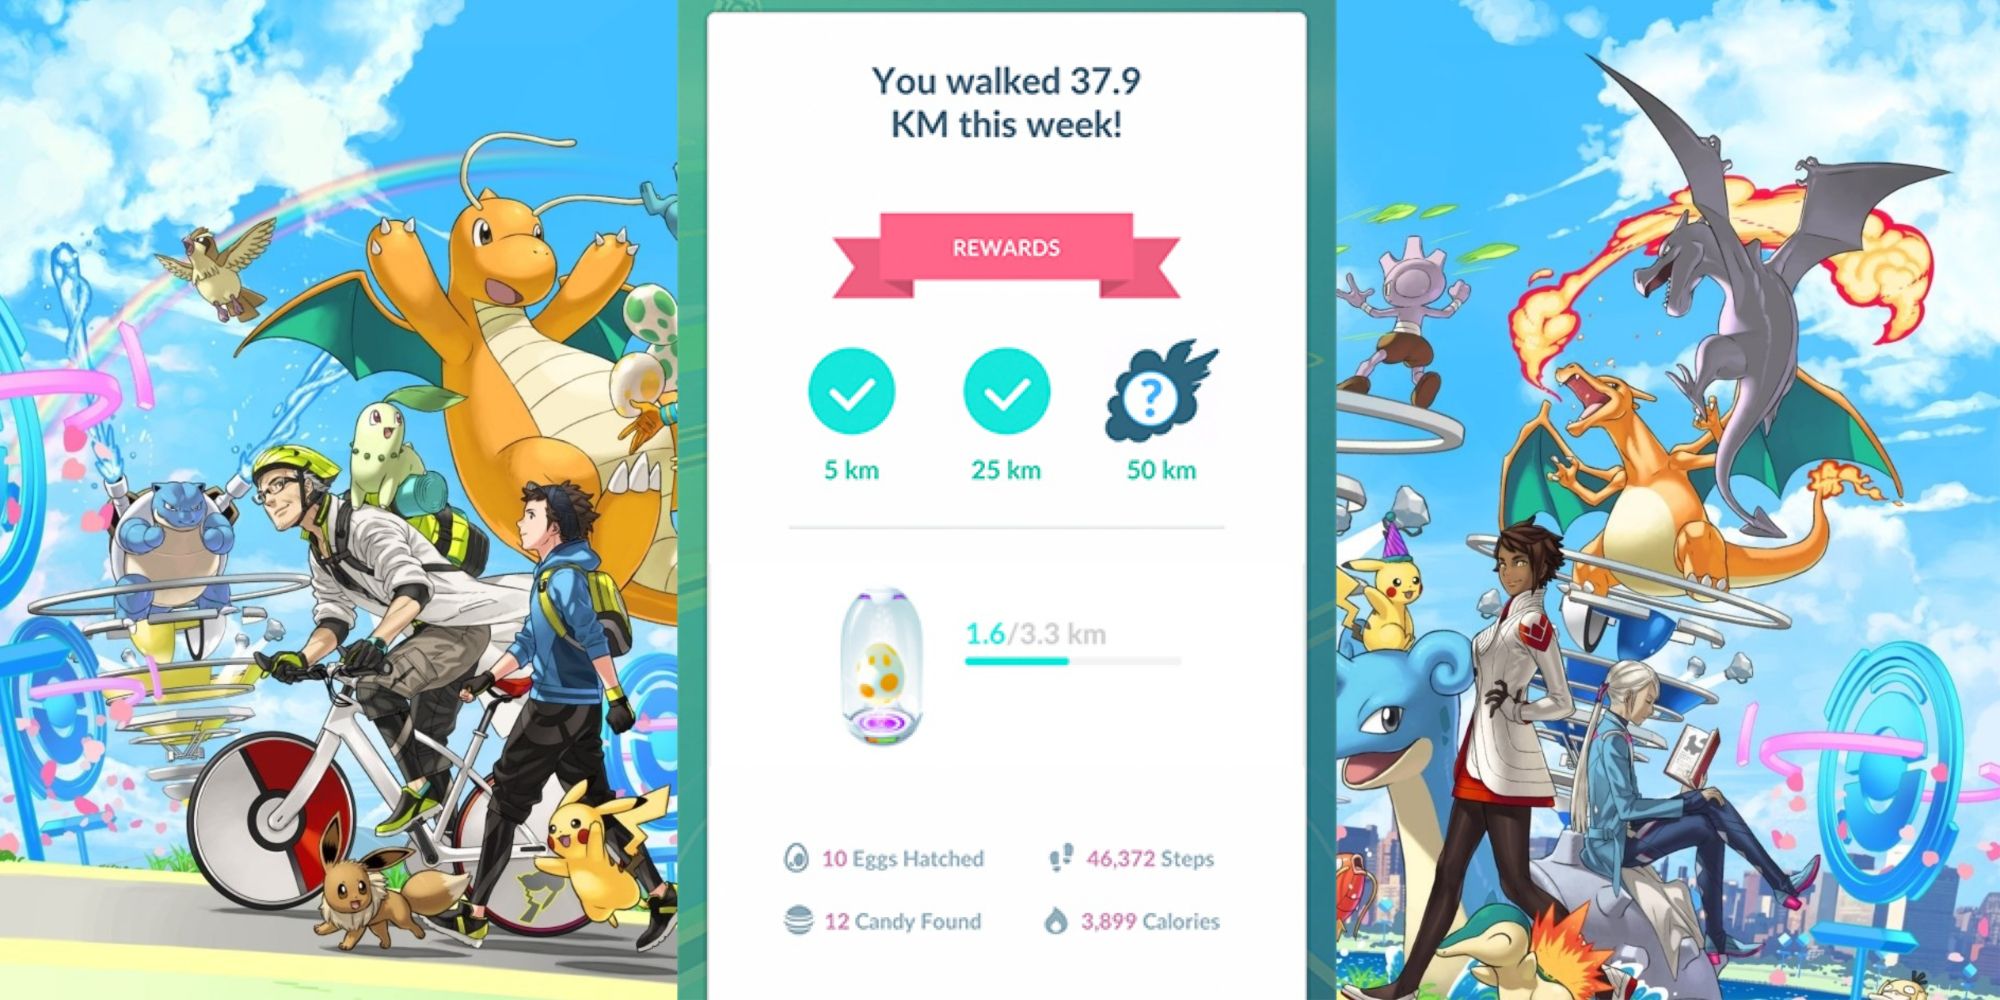 Pokemon GO Looking At The Results In Adventure Sync